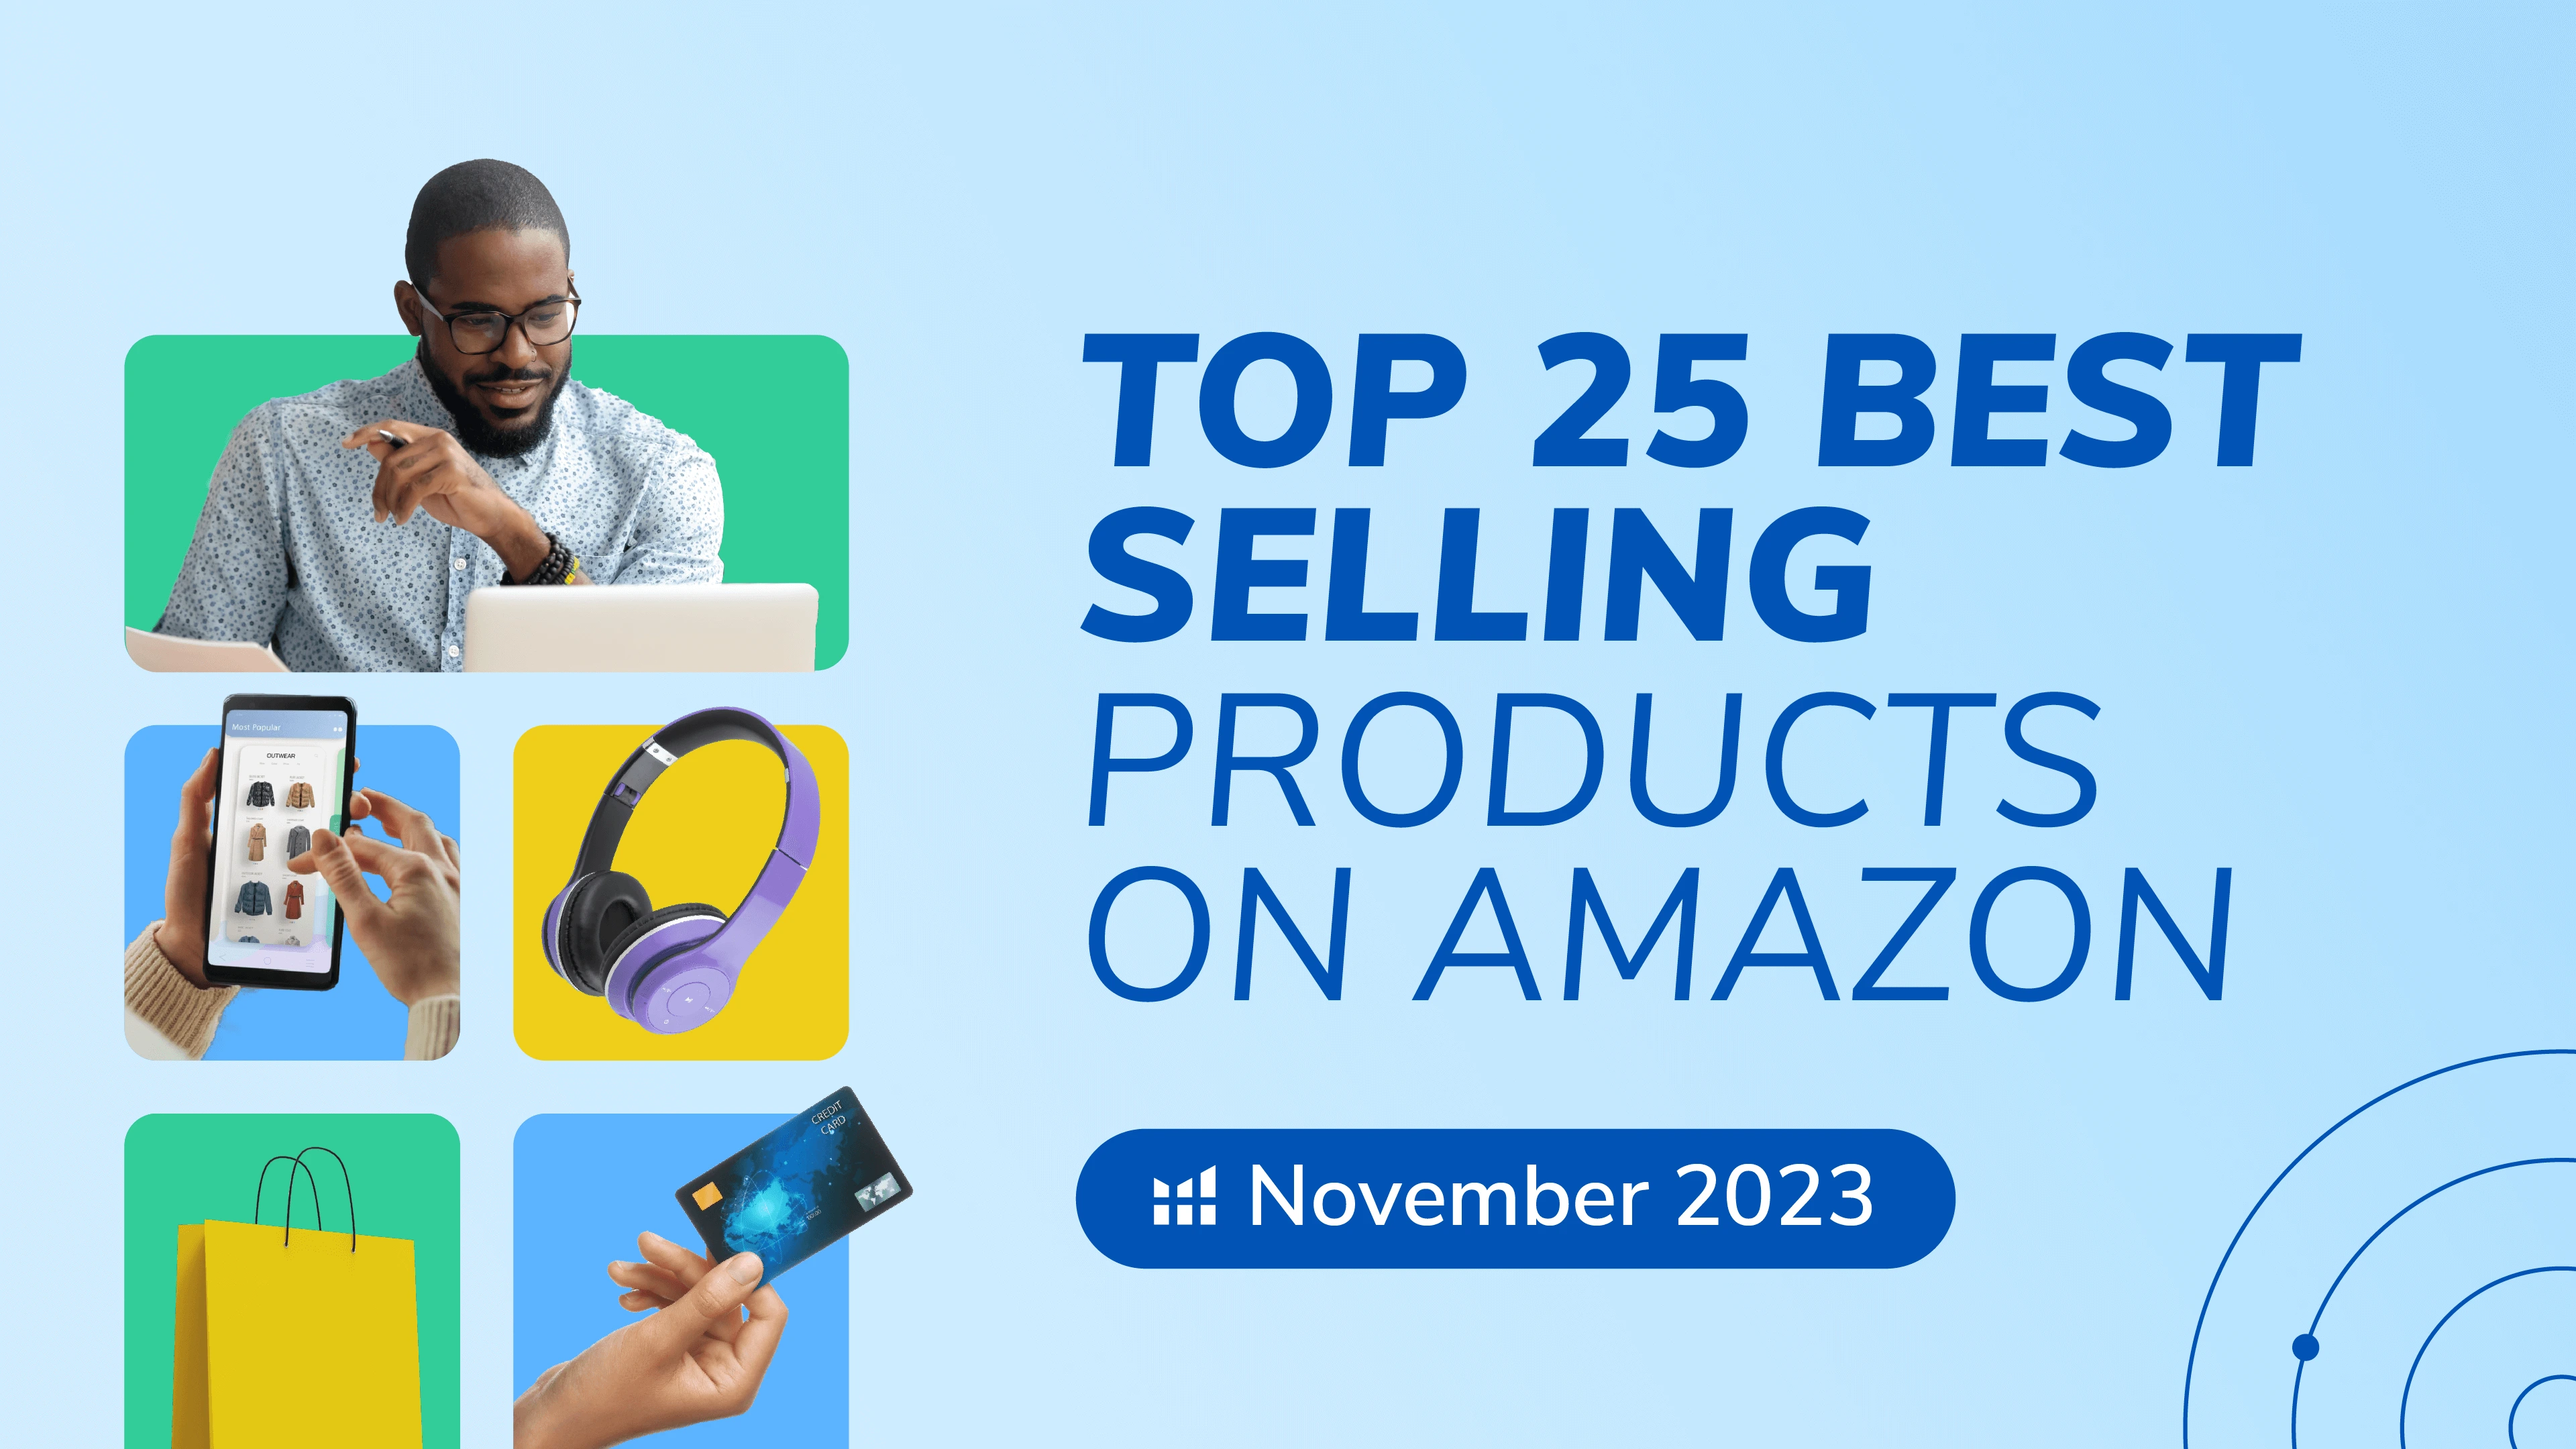 https://www.helium10.com/app/uploads/2023/11/Q4_BlogBanner_Top-25-Best-Selling-Products-on-Amazon.png